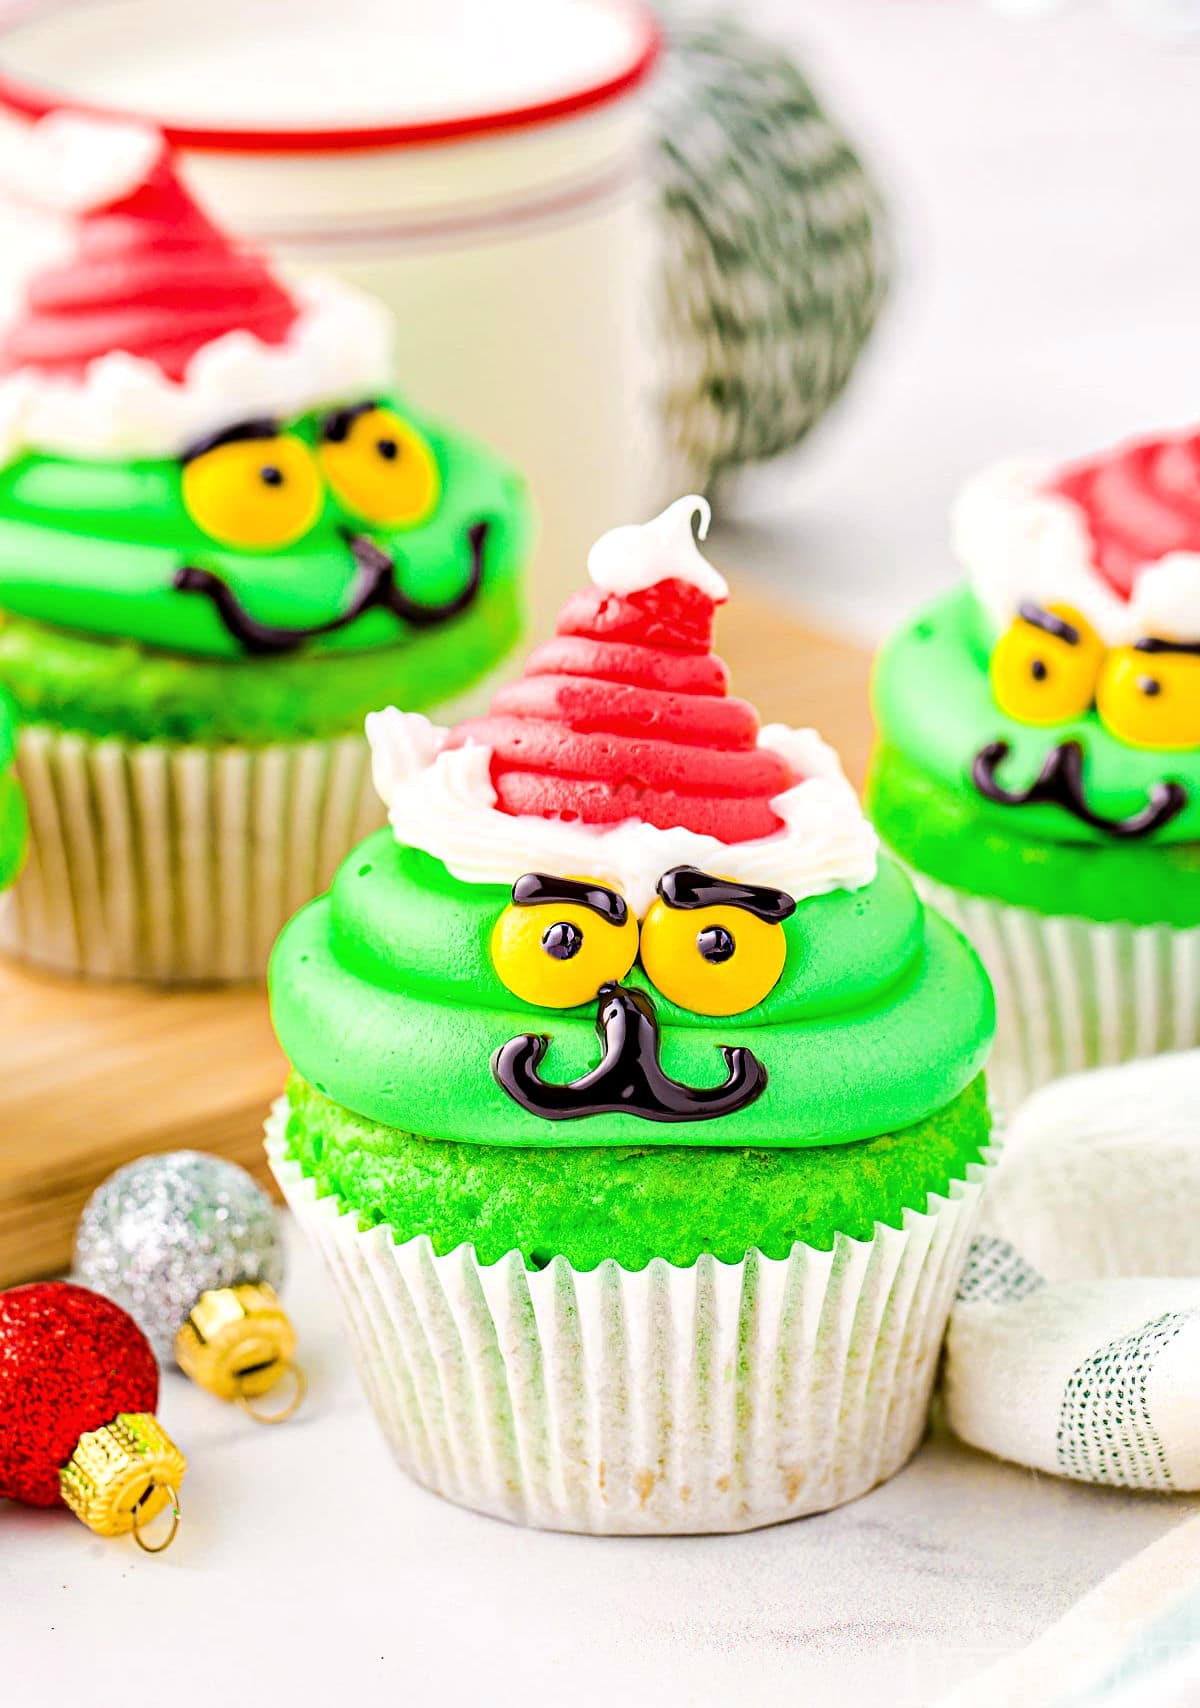 https://www.momontimeout.com/wp-content/uploads/2022/12/christmas-cupcakes-decorated-like-the-grinch.jpeg